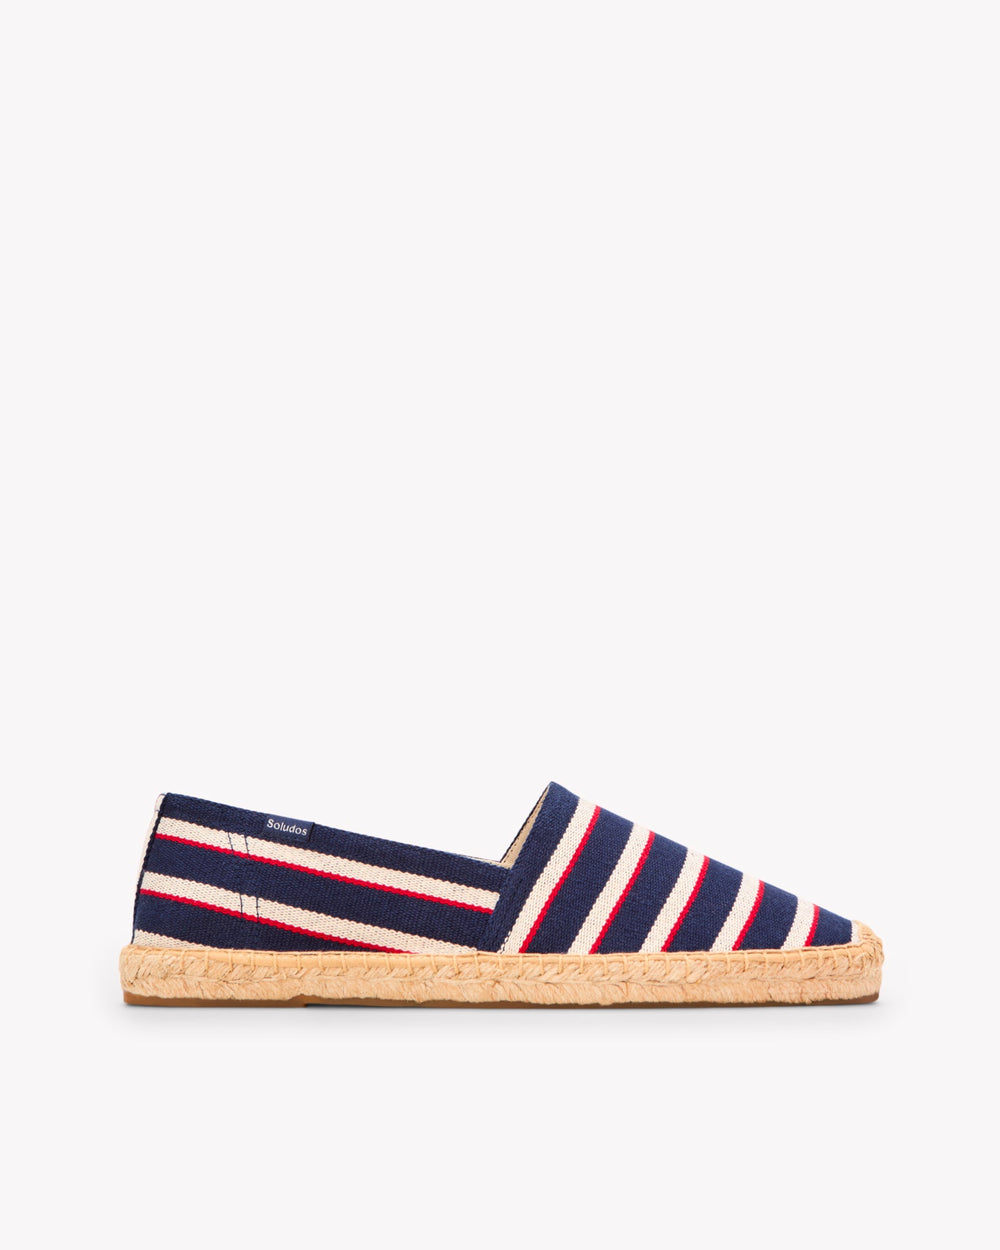 The Original Espadrille - Classic Stripes - Navy / Ivory / Red - Men's